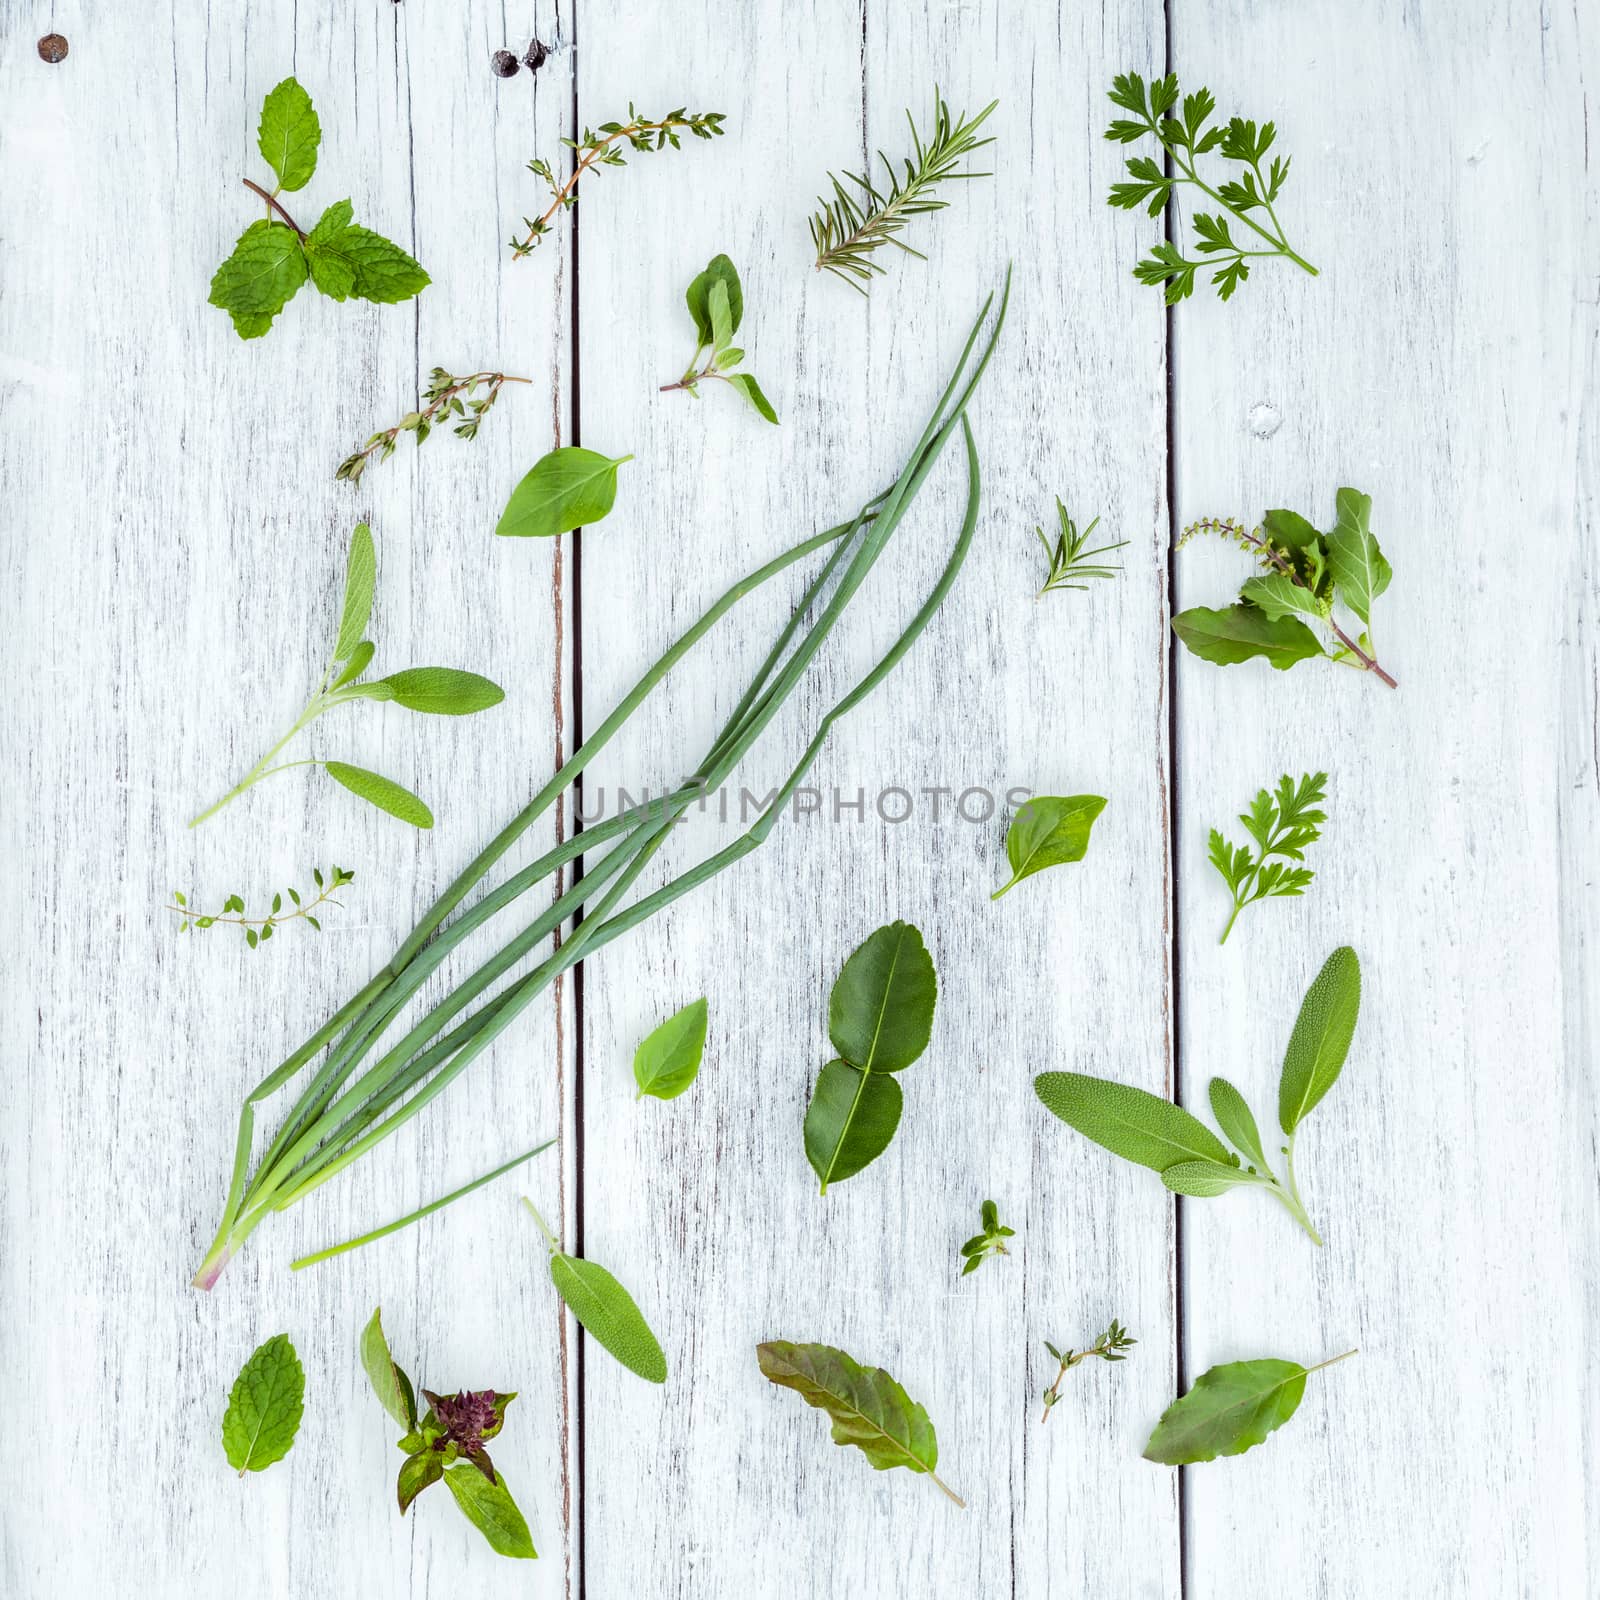 Various fresh herbs from the garden holy basil flower, basil flower,rosemary,oregano, sage,parsley ,thyme and dill over white wooden background.